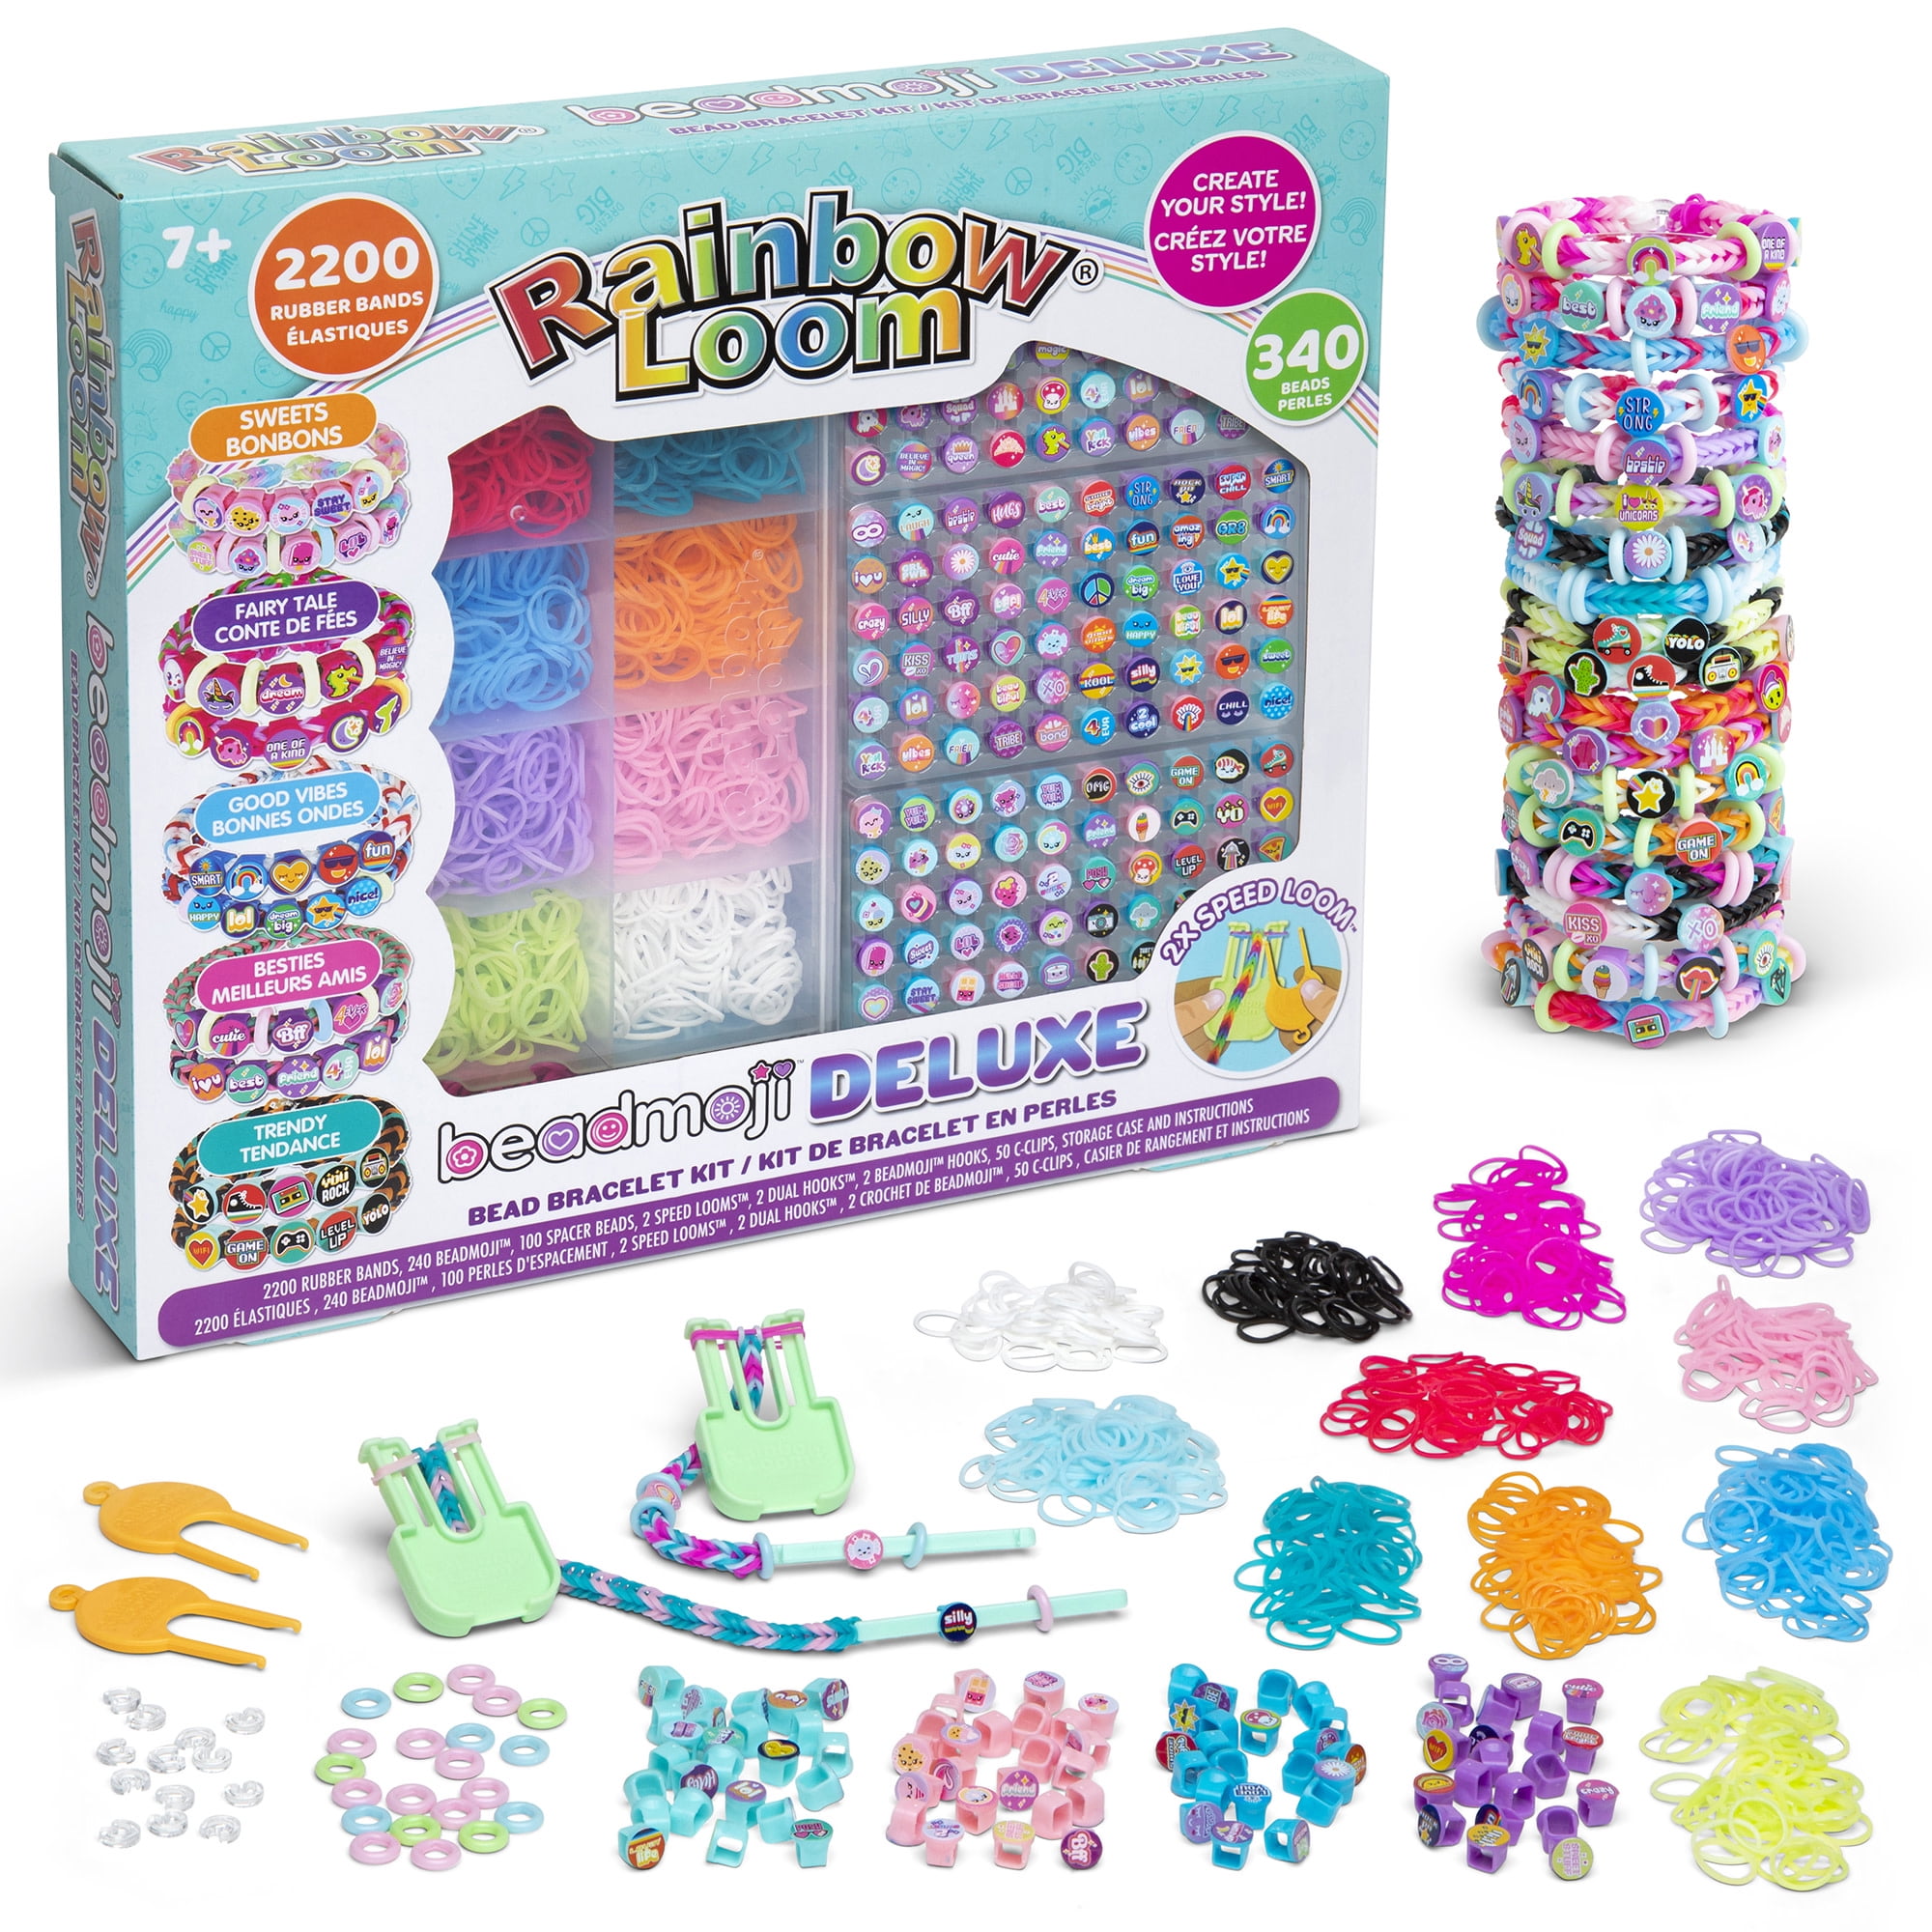 Rainbow Loom Kit With 36 Compartments, Diy Colored Rubber Bands Braided  Bracelets, Multi-Size Handmade Material, Intellectual Toy